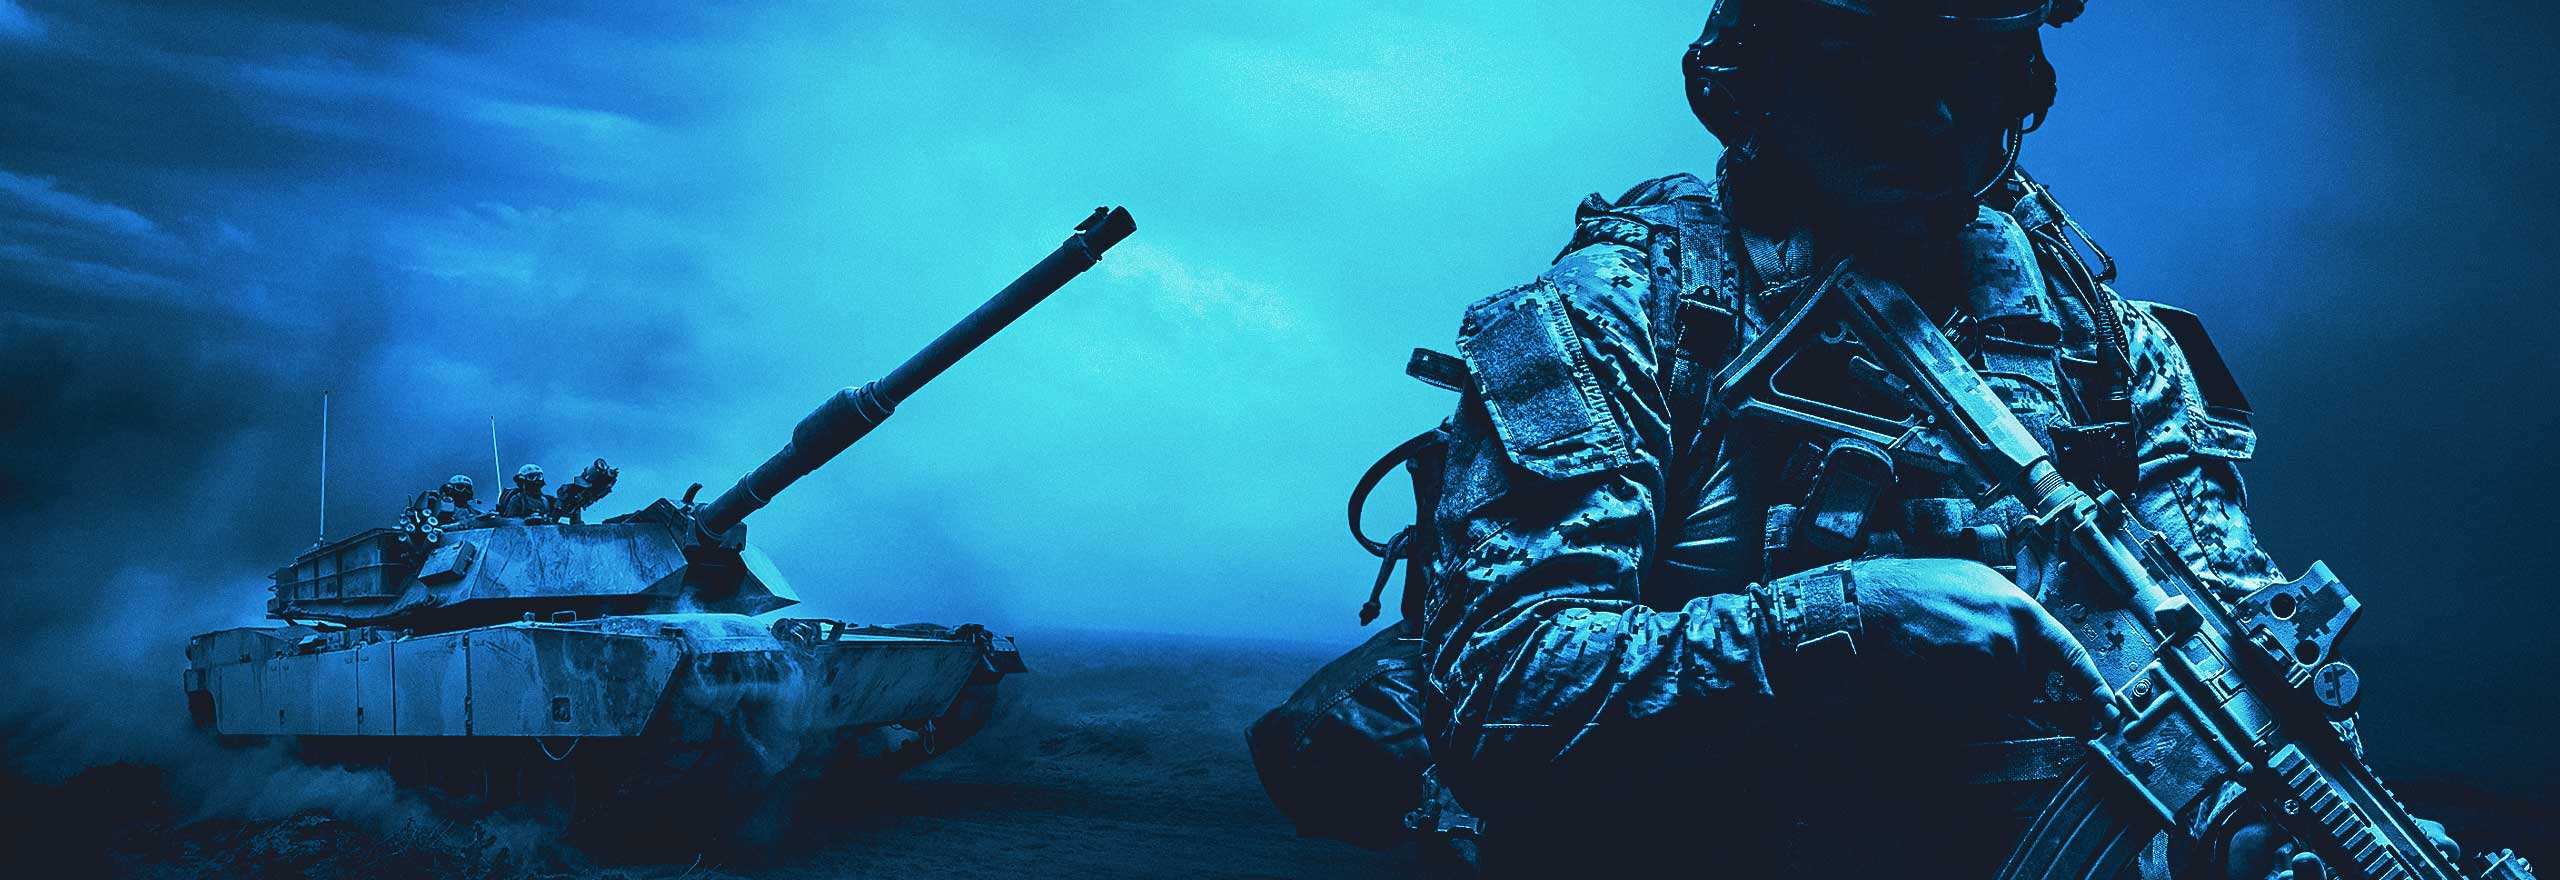 A blue-tinted image featuring a soldier, tank and helicopters.